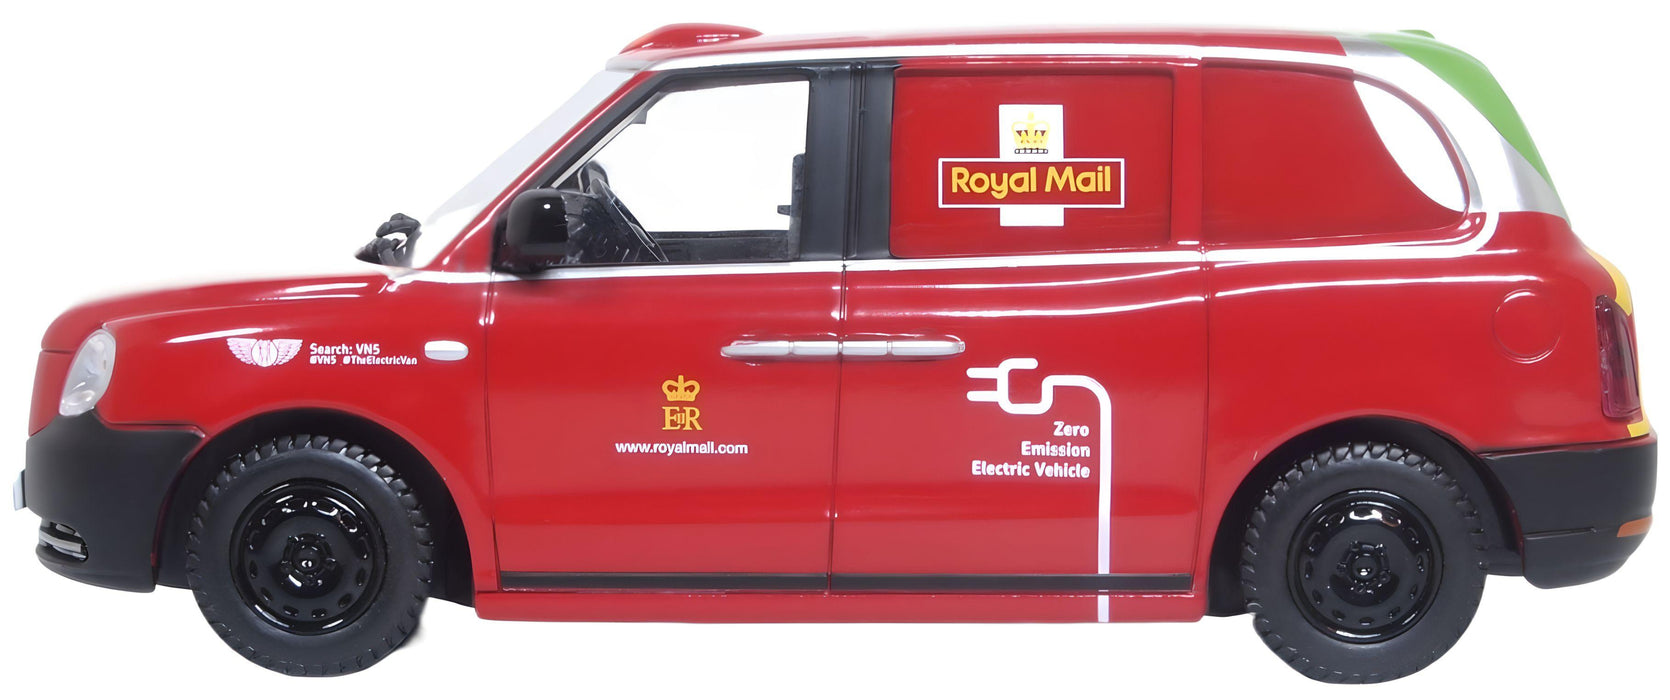 Oxford Diecast 1:43 LEVC Royal Mail TX5 Taxi Prototype VN5 Van Nearside